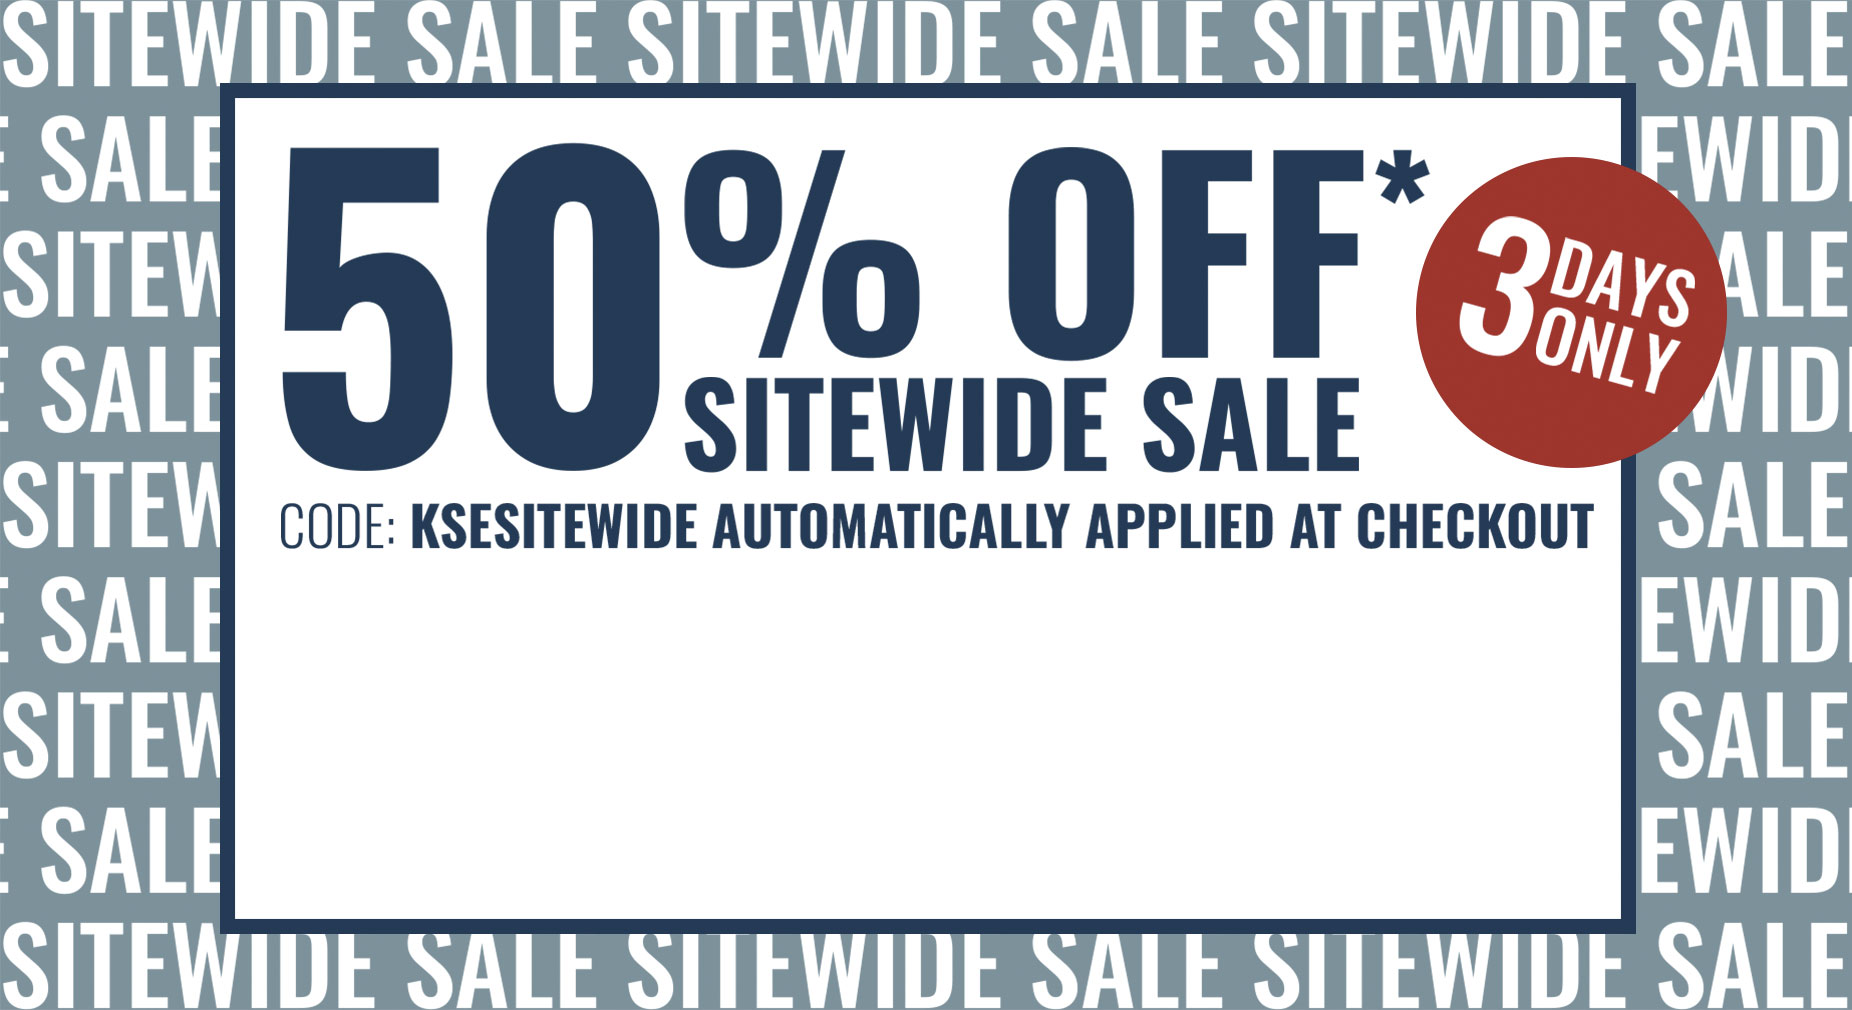 50% off* sitewide sale